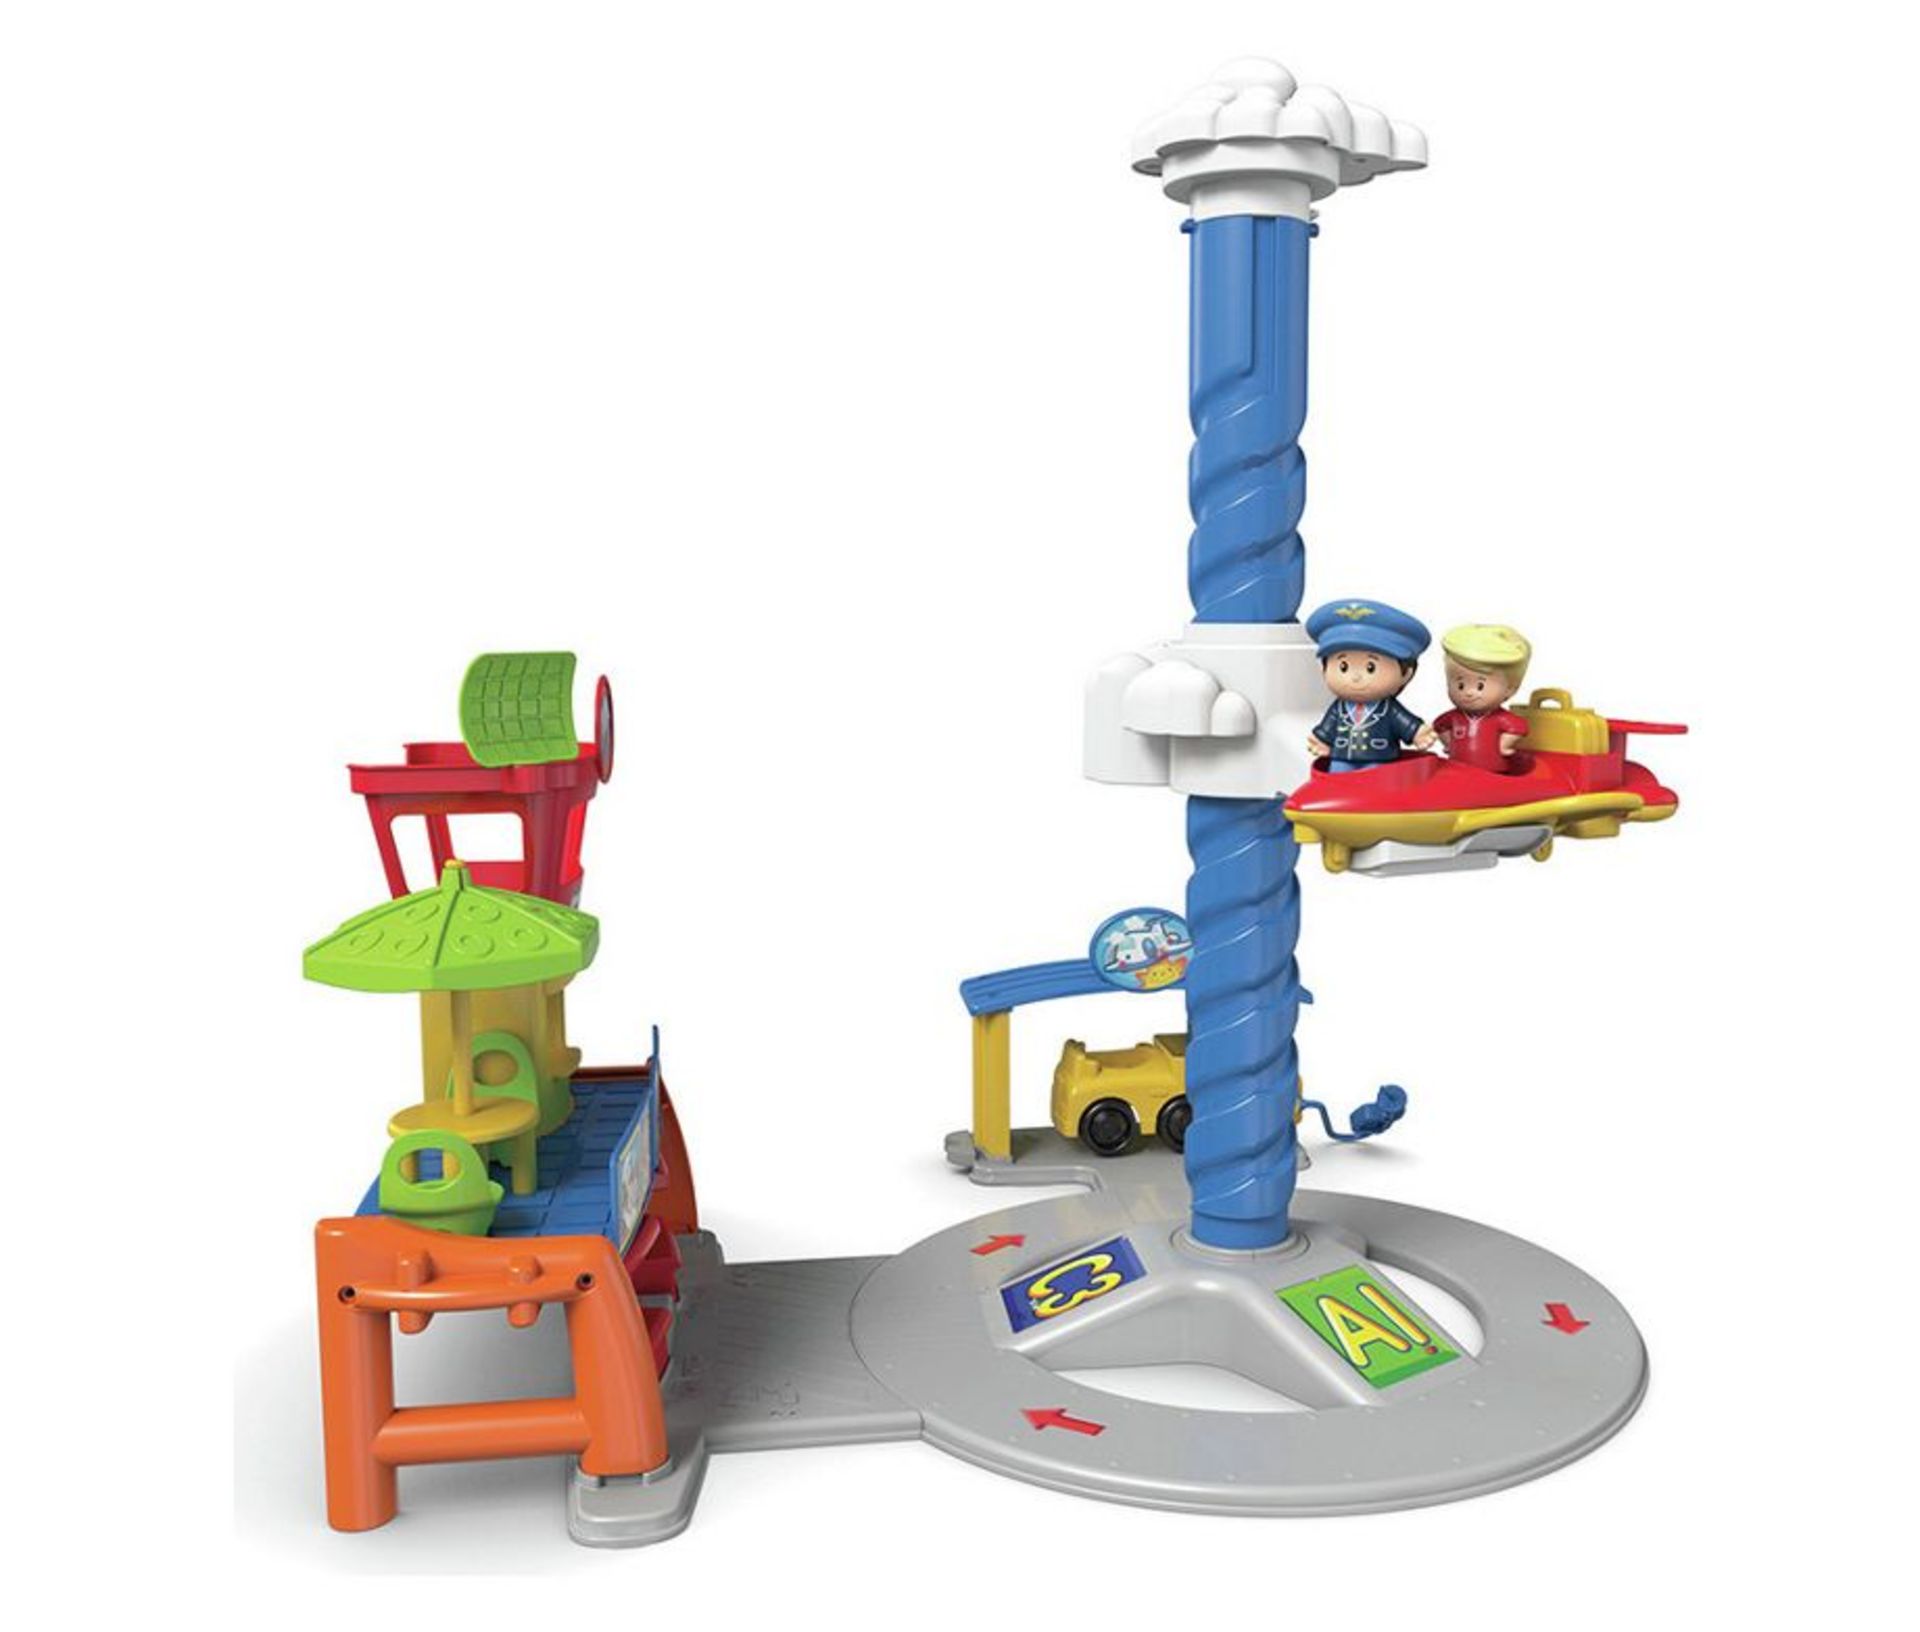 V *TRADE QTY* Brand New Fisher Price Little People Spinnin' Sounds Airport ISP - £23.99 X 3 YOUR BID